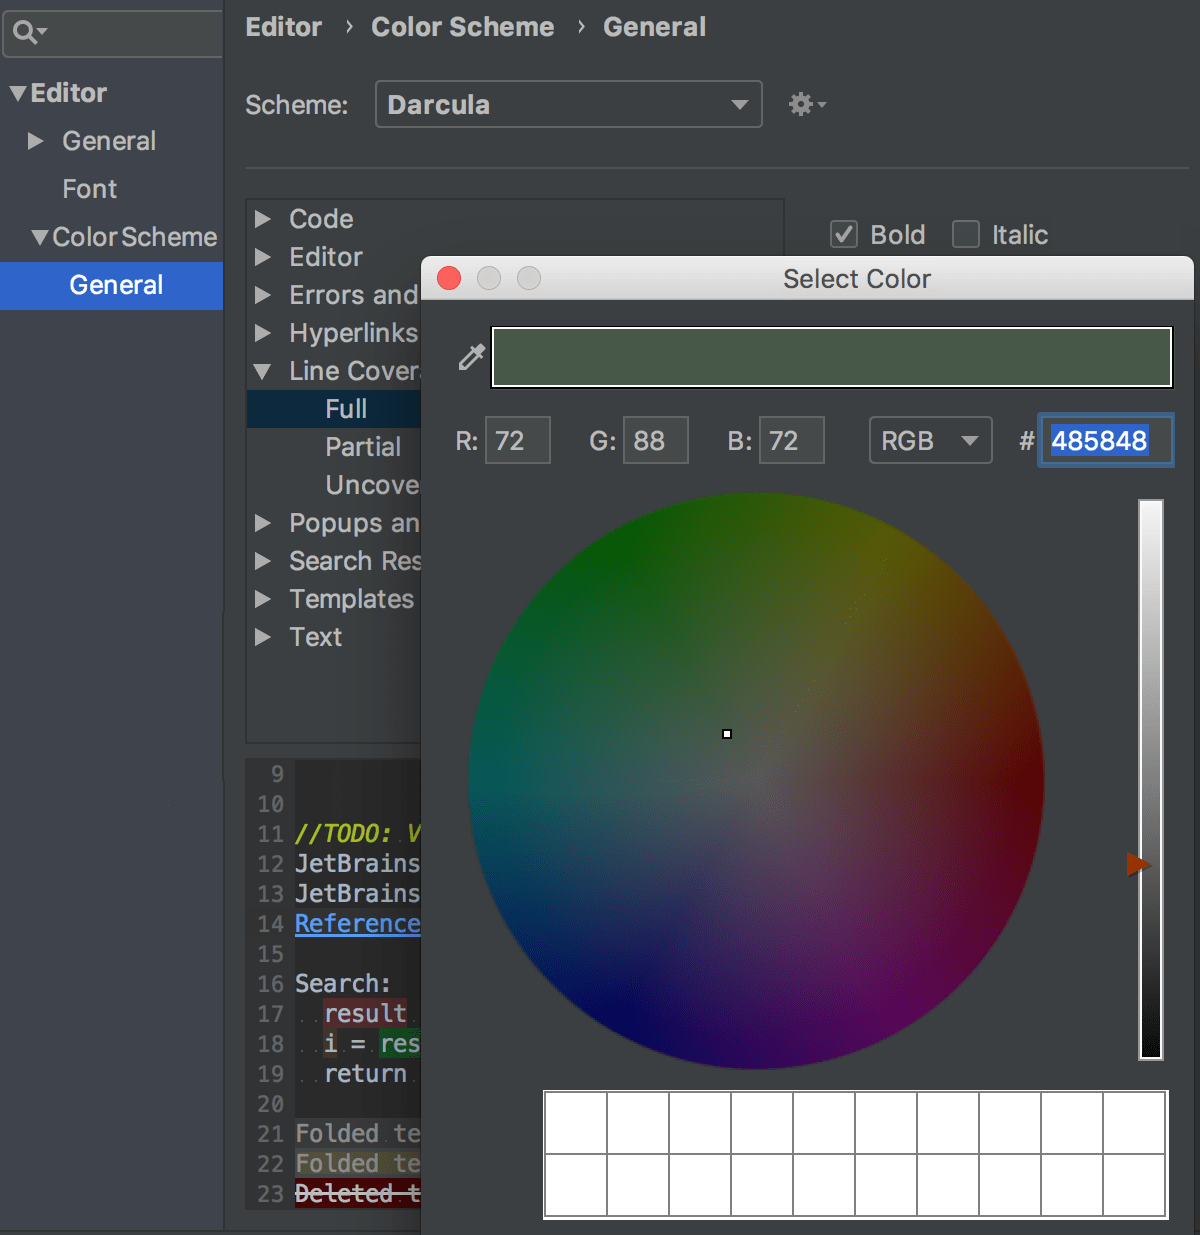 Configuring colors for indicating coverage status in the editor